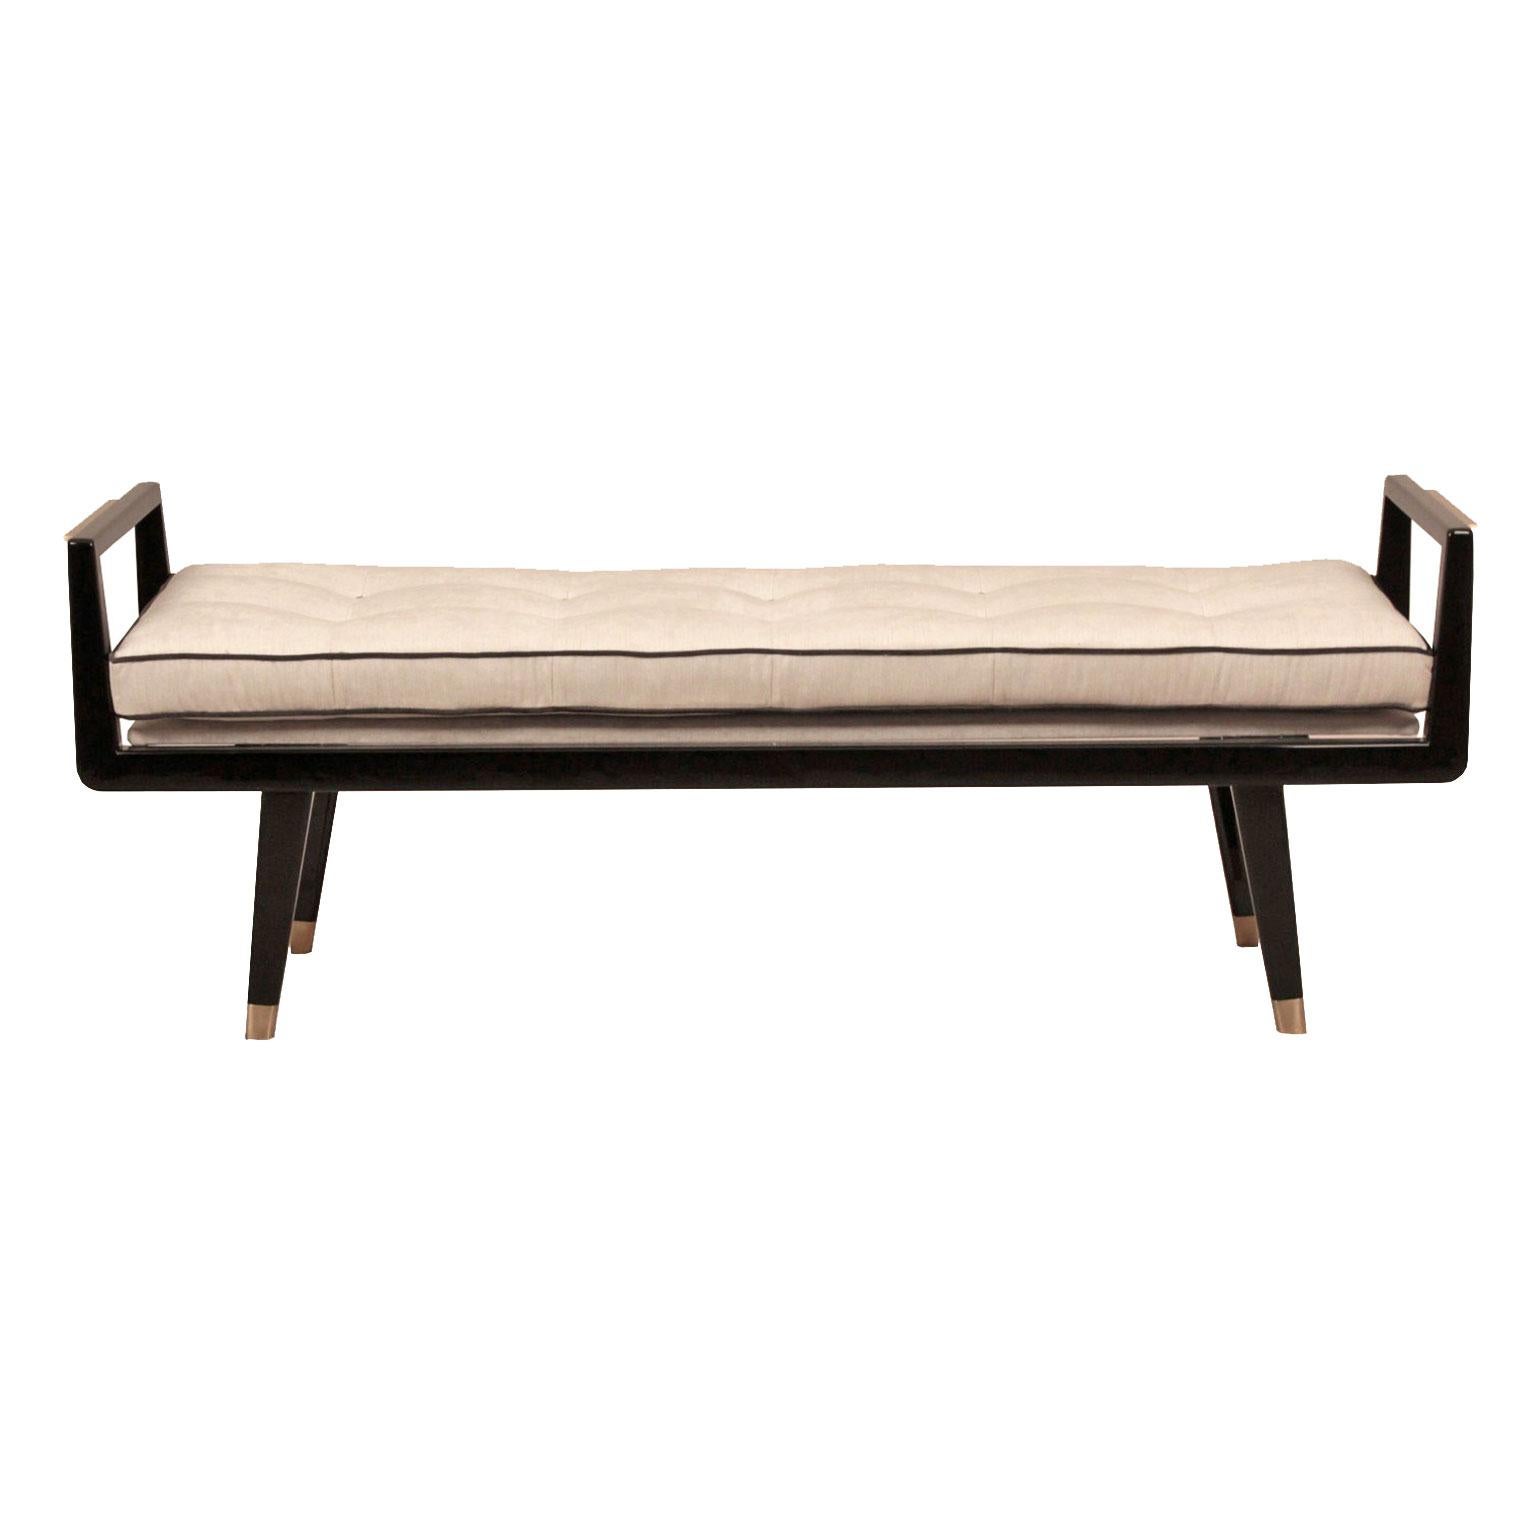 Hand-Crafted Modern Lacquer Bench with Brass Detailing and Tufted Seat For Sale